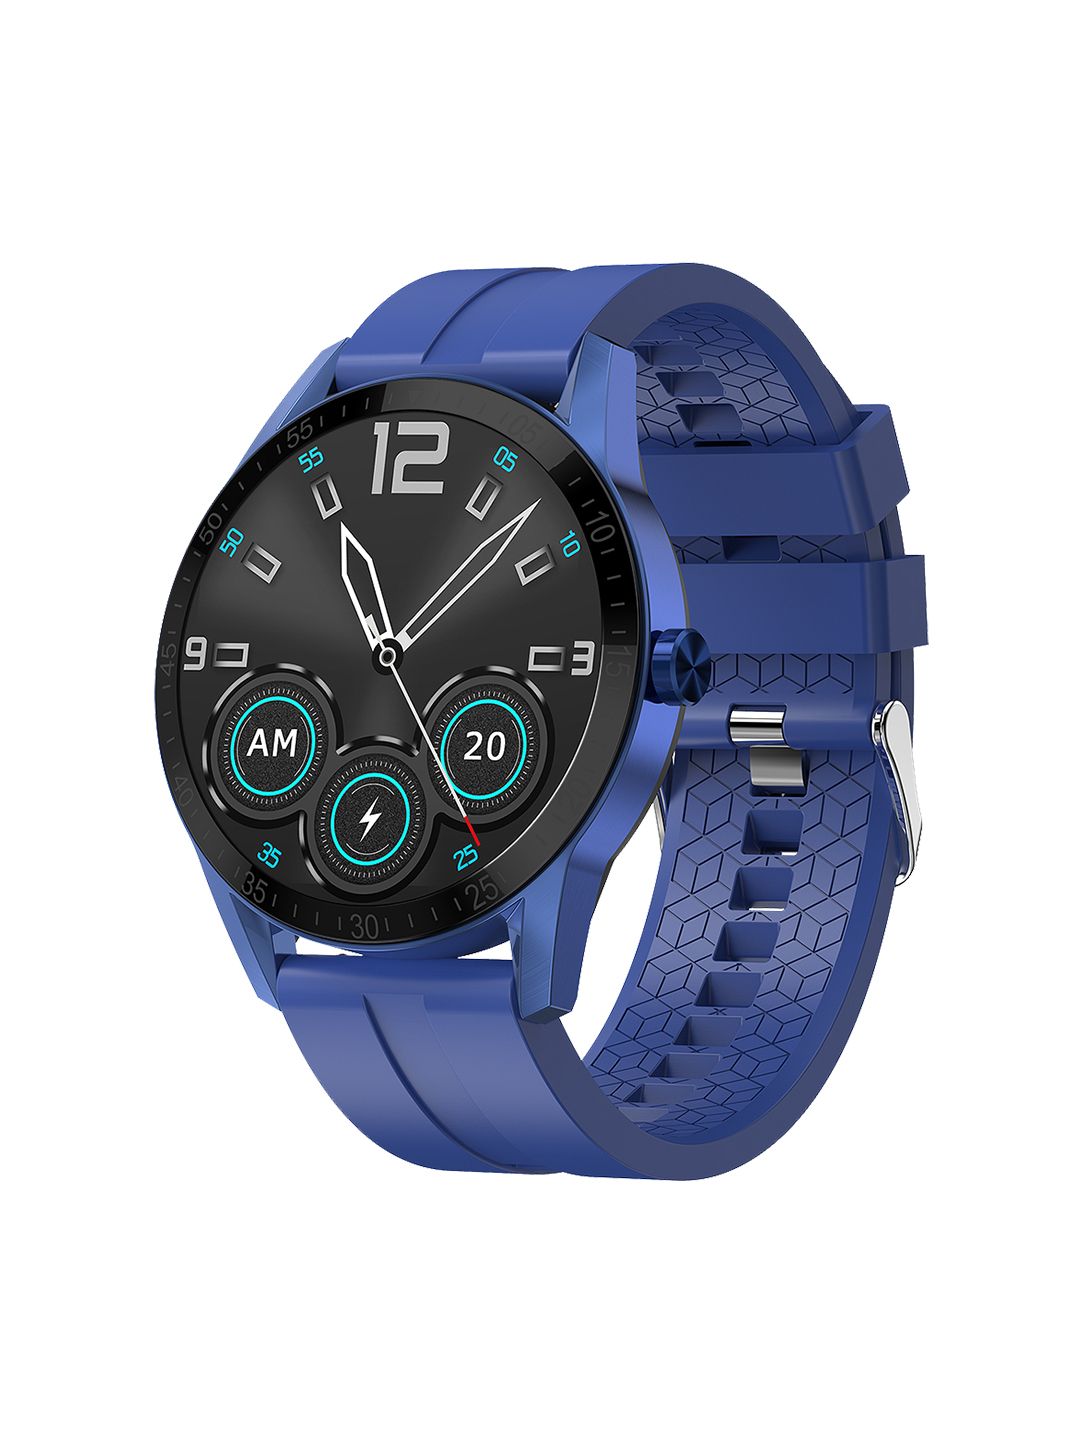 Fire-Boltt Talk Bluetooth Calling Smartwatch - Blue 04BSWAAY#6 Price in India